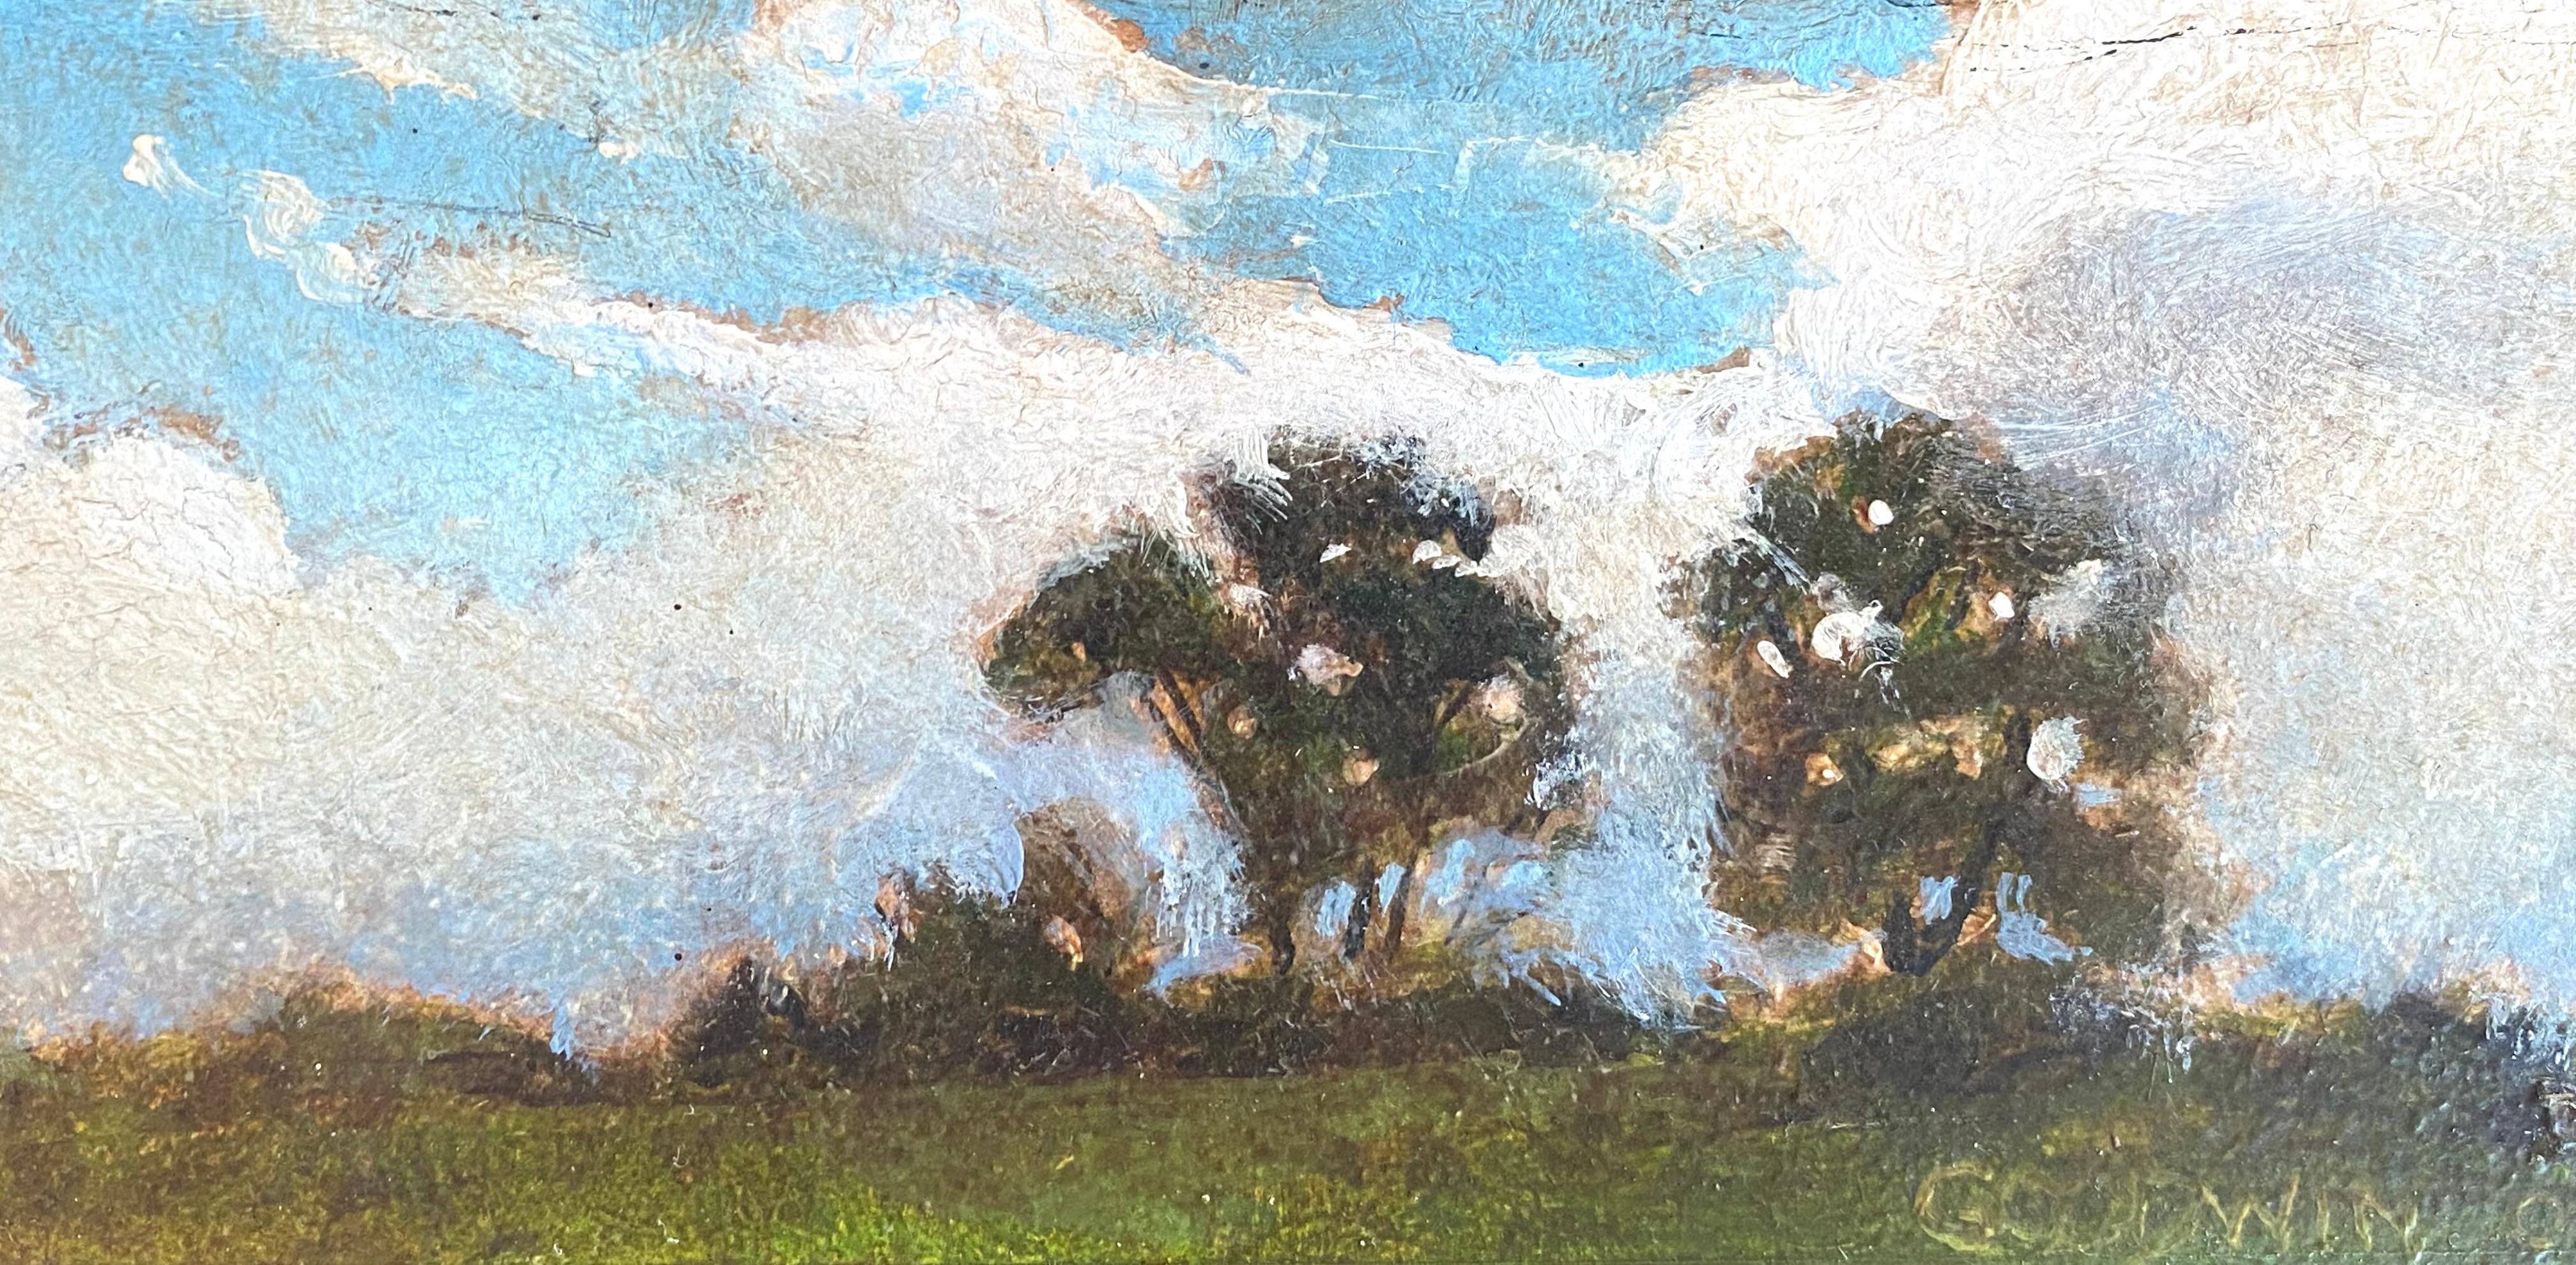 Small well executed oil on card stock mounted to board miniature painting of two treesq on a hillside.  Signed lower right “Goodwin 05”. Condition is very good. Artist unknown. The artist might be a Michael Goodwin.  Maine artist who now lives in